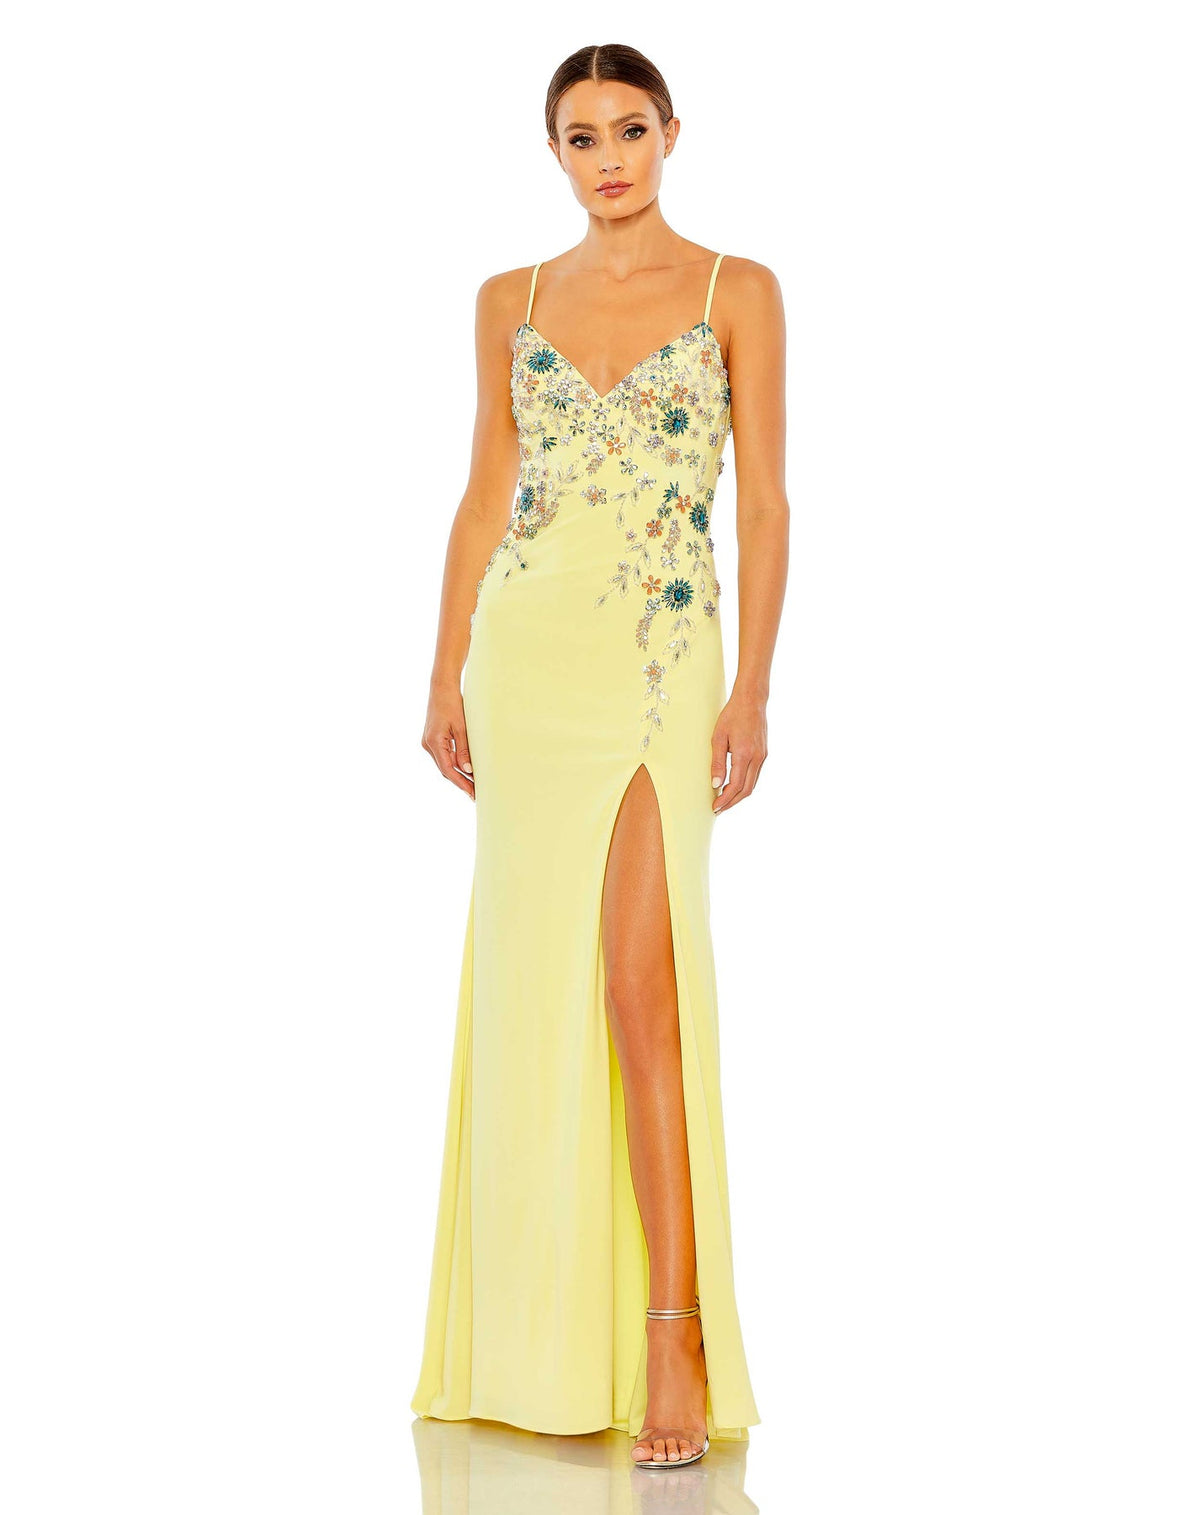 mac duggal, MULTI COLOR BEADED FLORAL CAMI GOWN, Style #42006 yellow